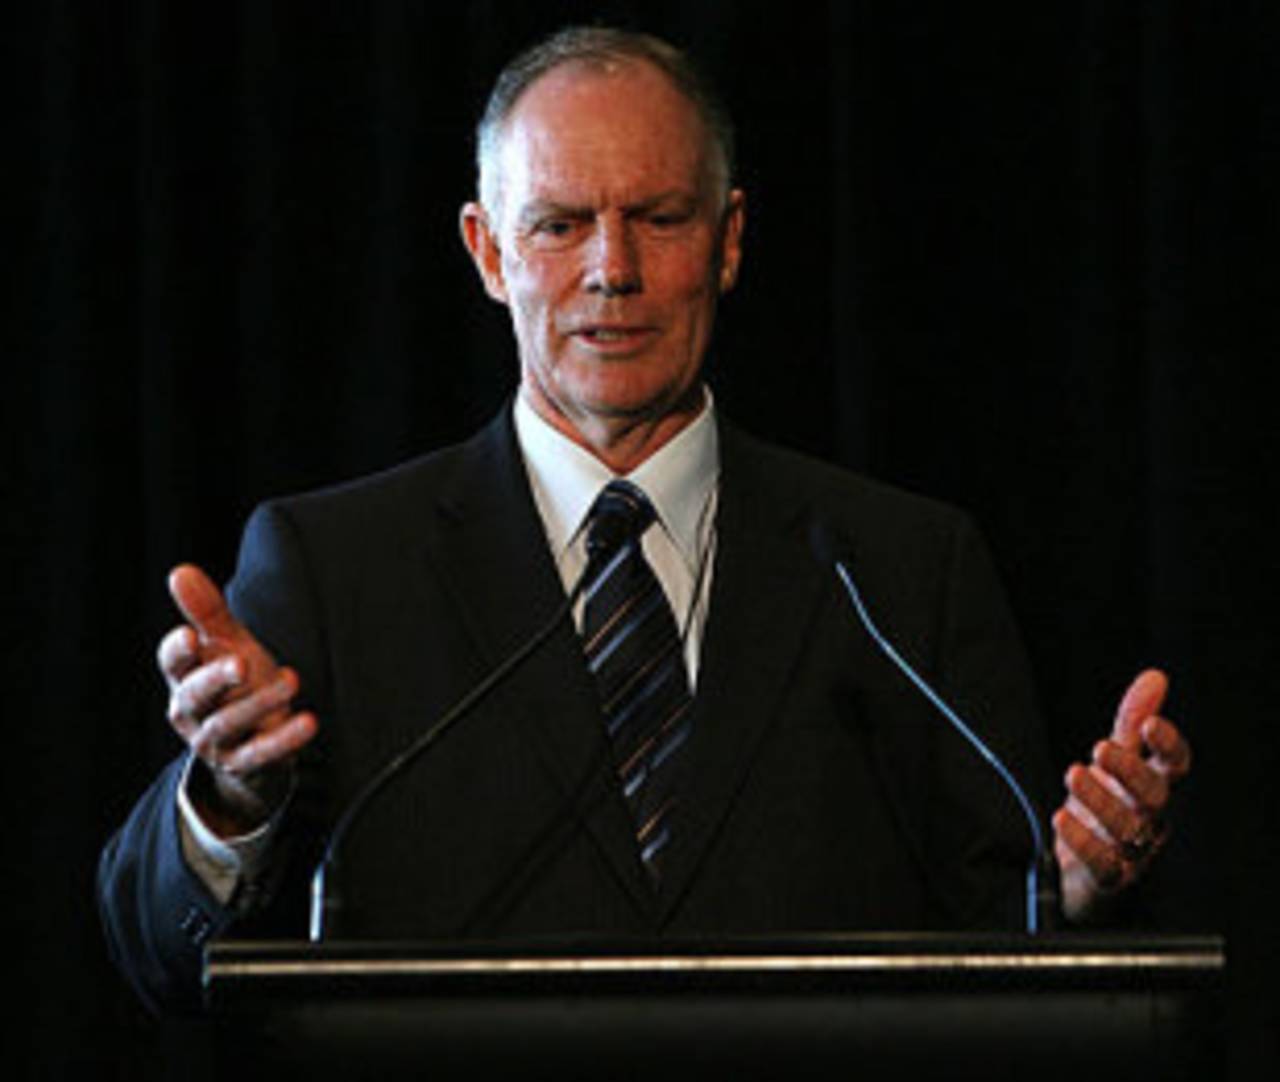 Greg Chappell speaks at the 7th Annual Sir Donald Bradman Oration, Melbourne, November 19, 2009